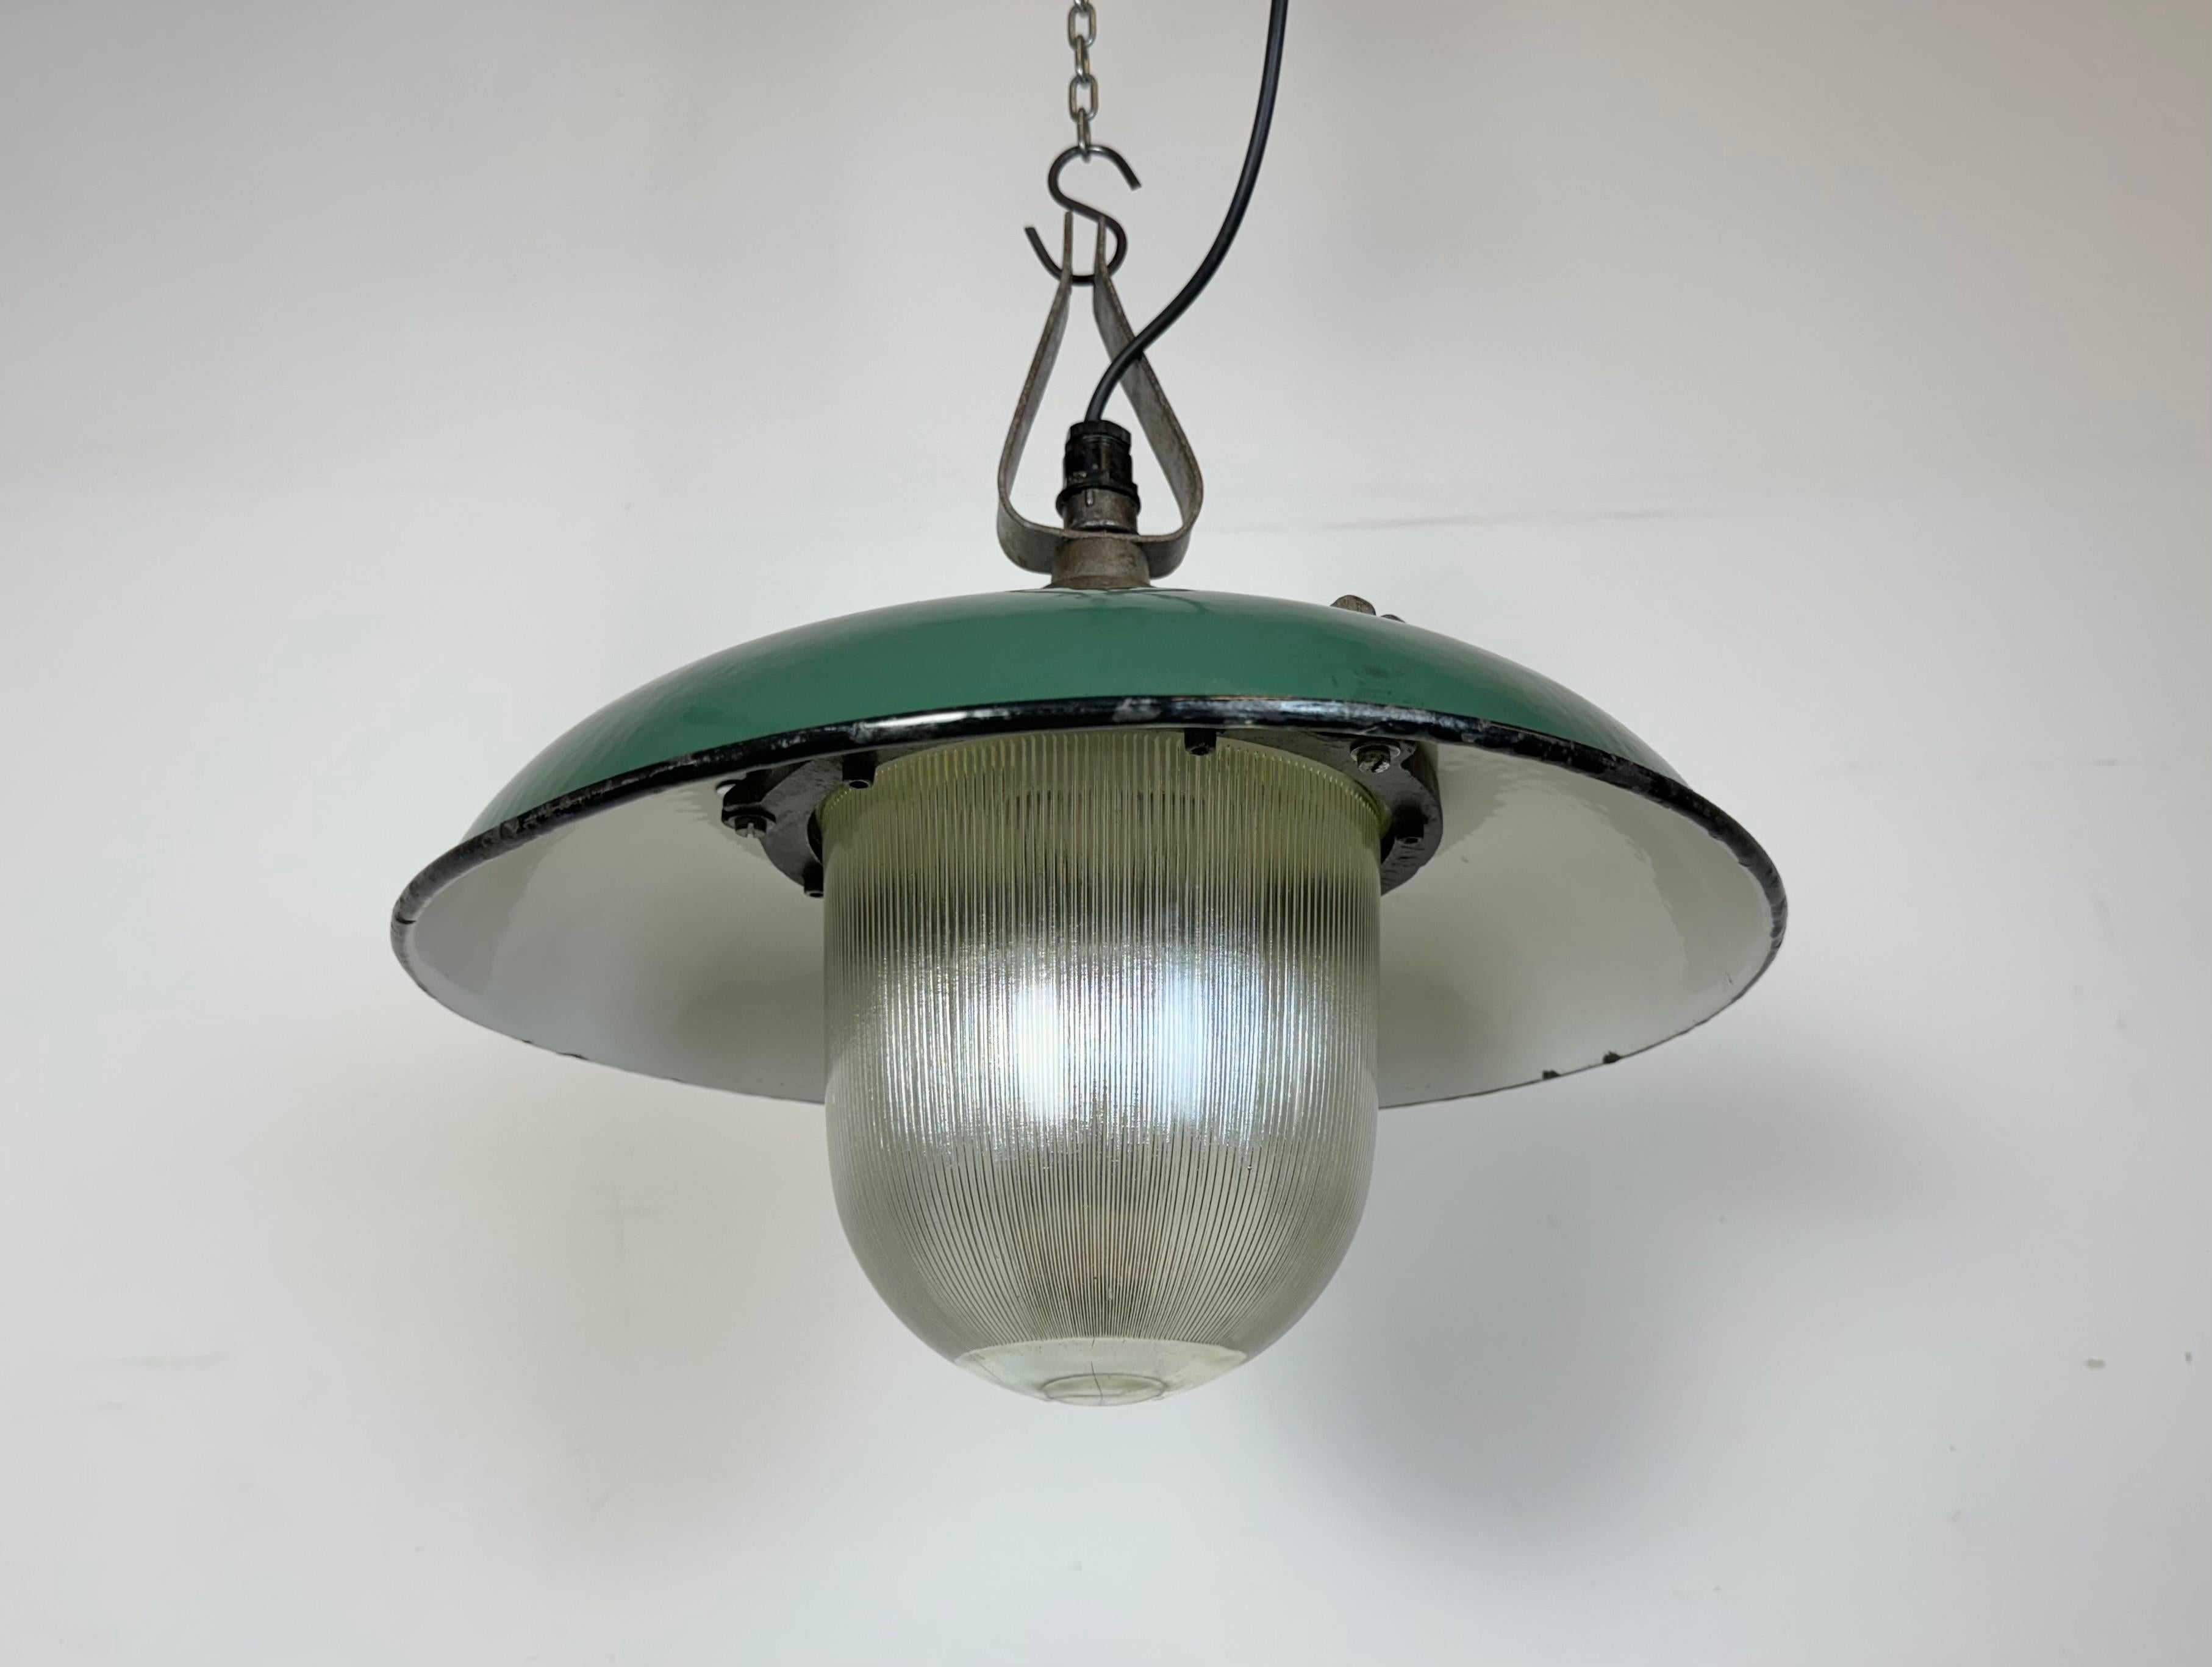 Industrial Green Enamel Factory Pendant Lamp in Cast Iron, 1960s For Sale 5